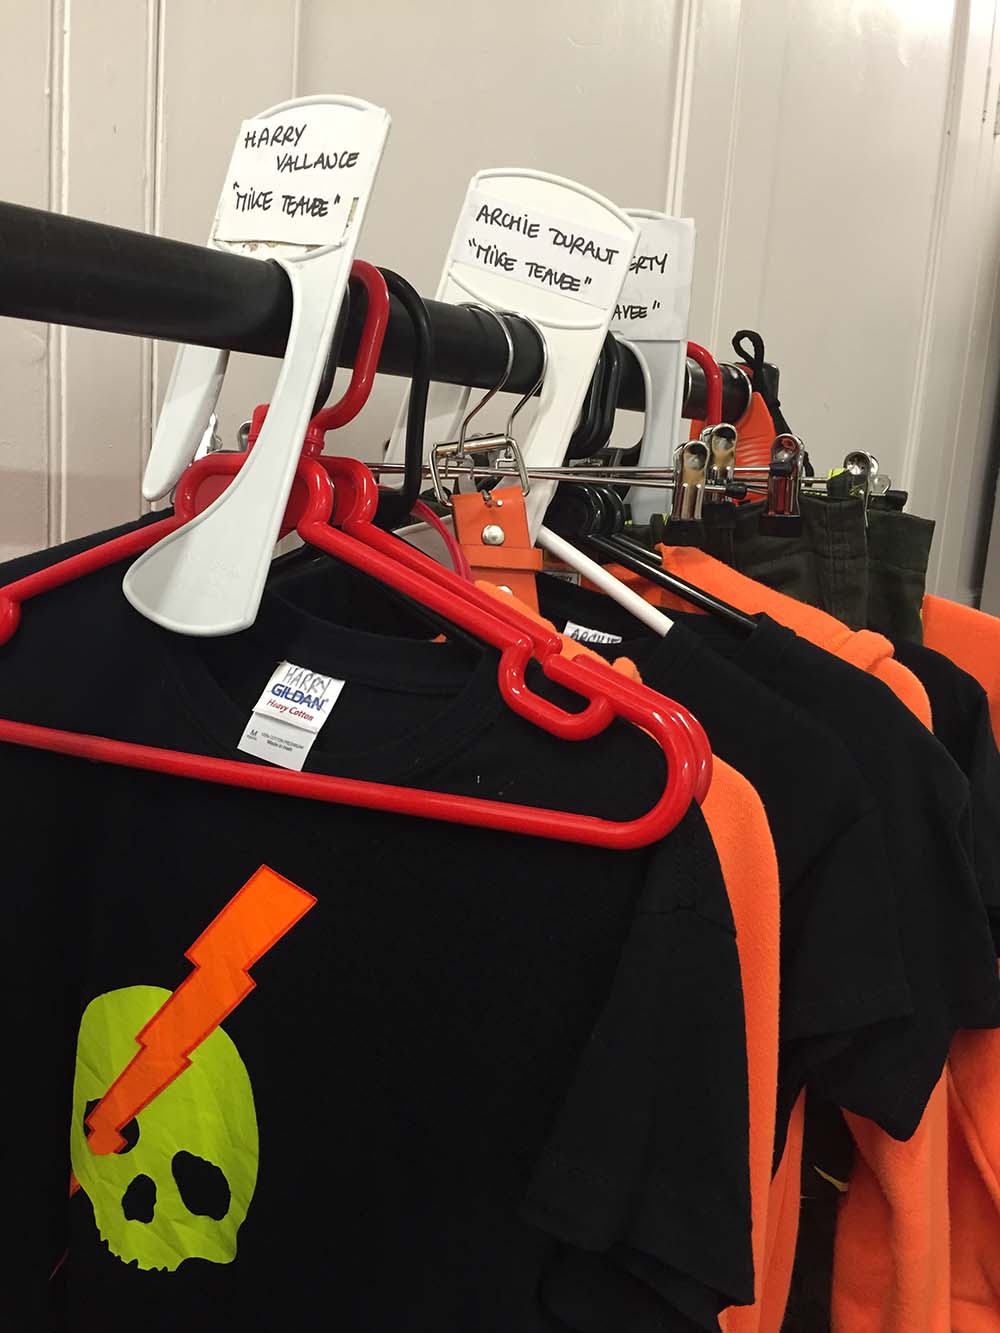 Mike Teavee costumes lined up backstage at the Theatre Royal Drury Lane